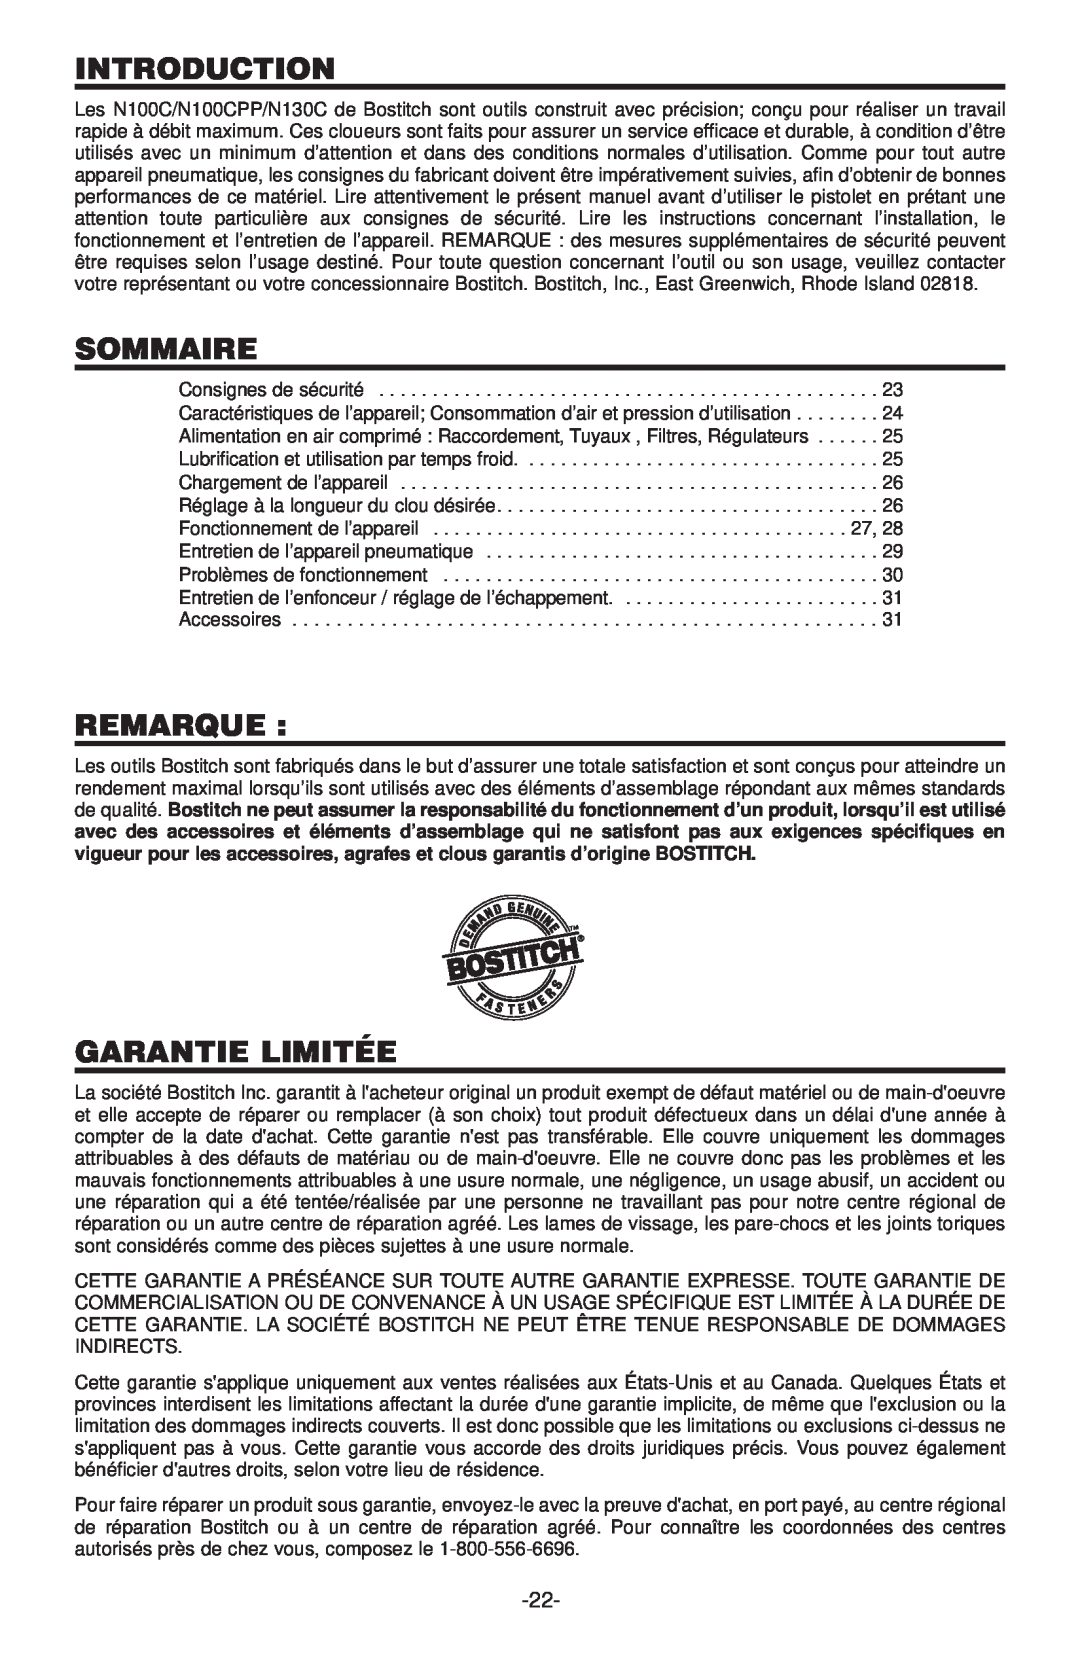 Bostitch N130C, N100CPP manual Sommaire, Remarque, Garantie Limitée, Introduction 